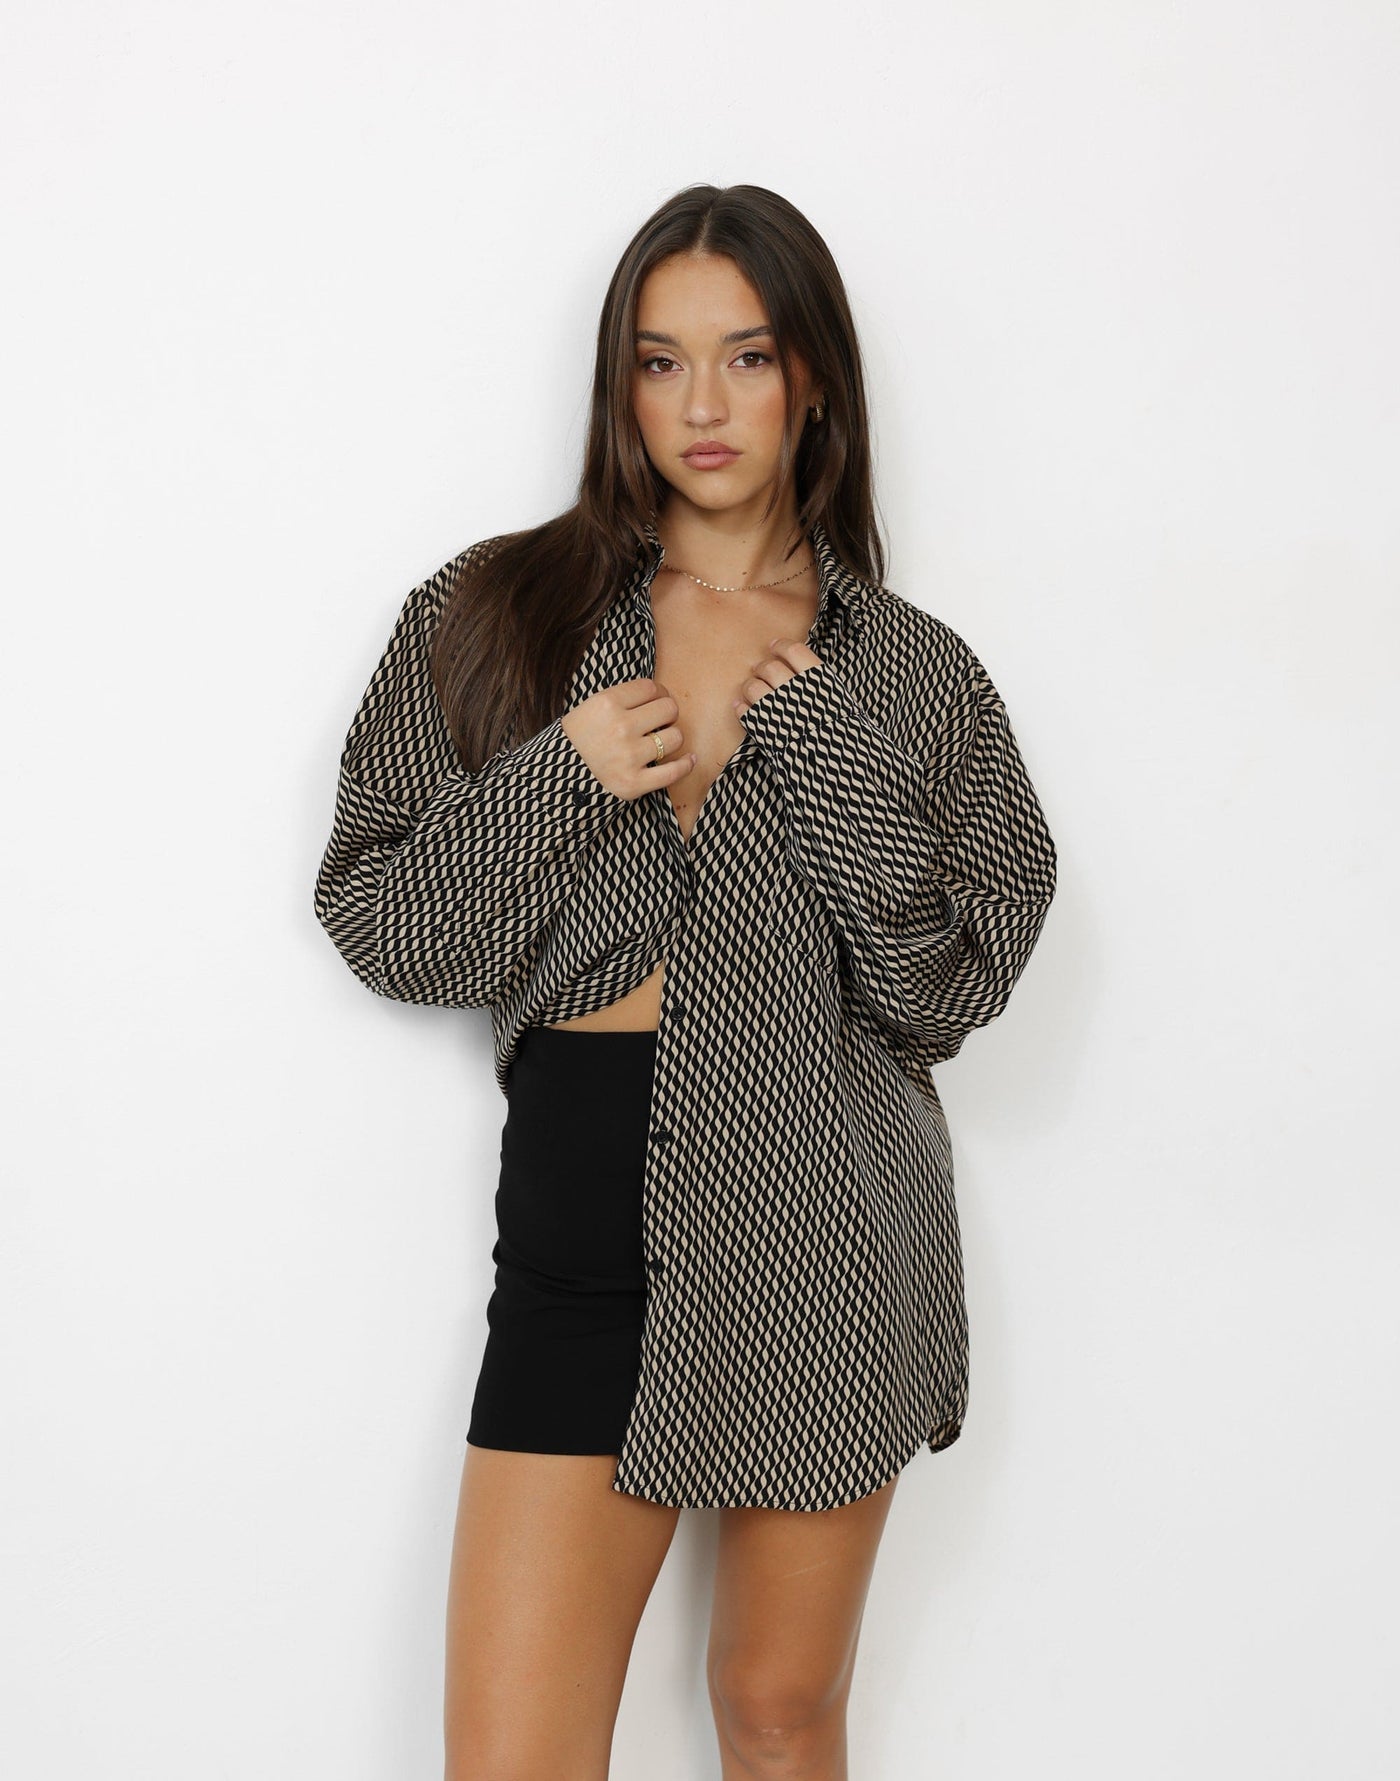 Zaya Long Sleeve Shirt (Sand Ripple) | CHARCOAL Exclusive - Relaxed Fit Oversized Patterned Button Closure Shirt - Women's Top - Charcoal Clothing